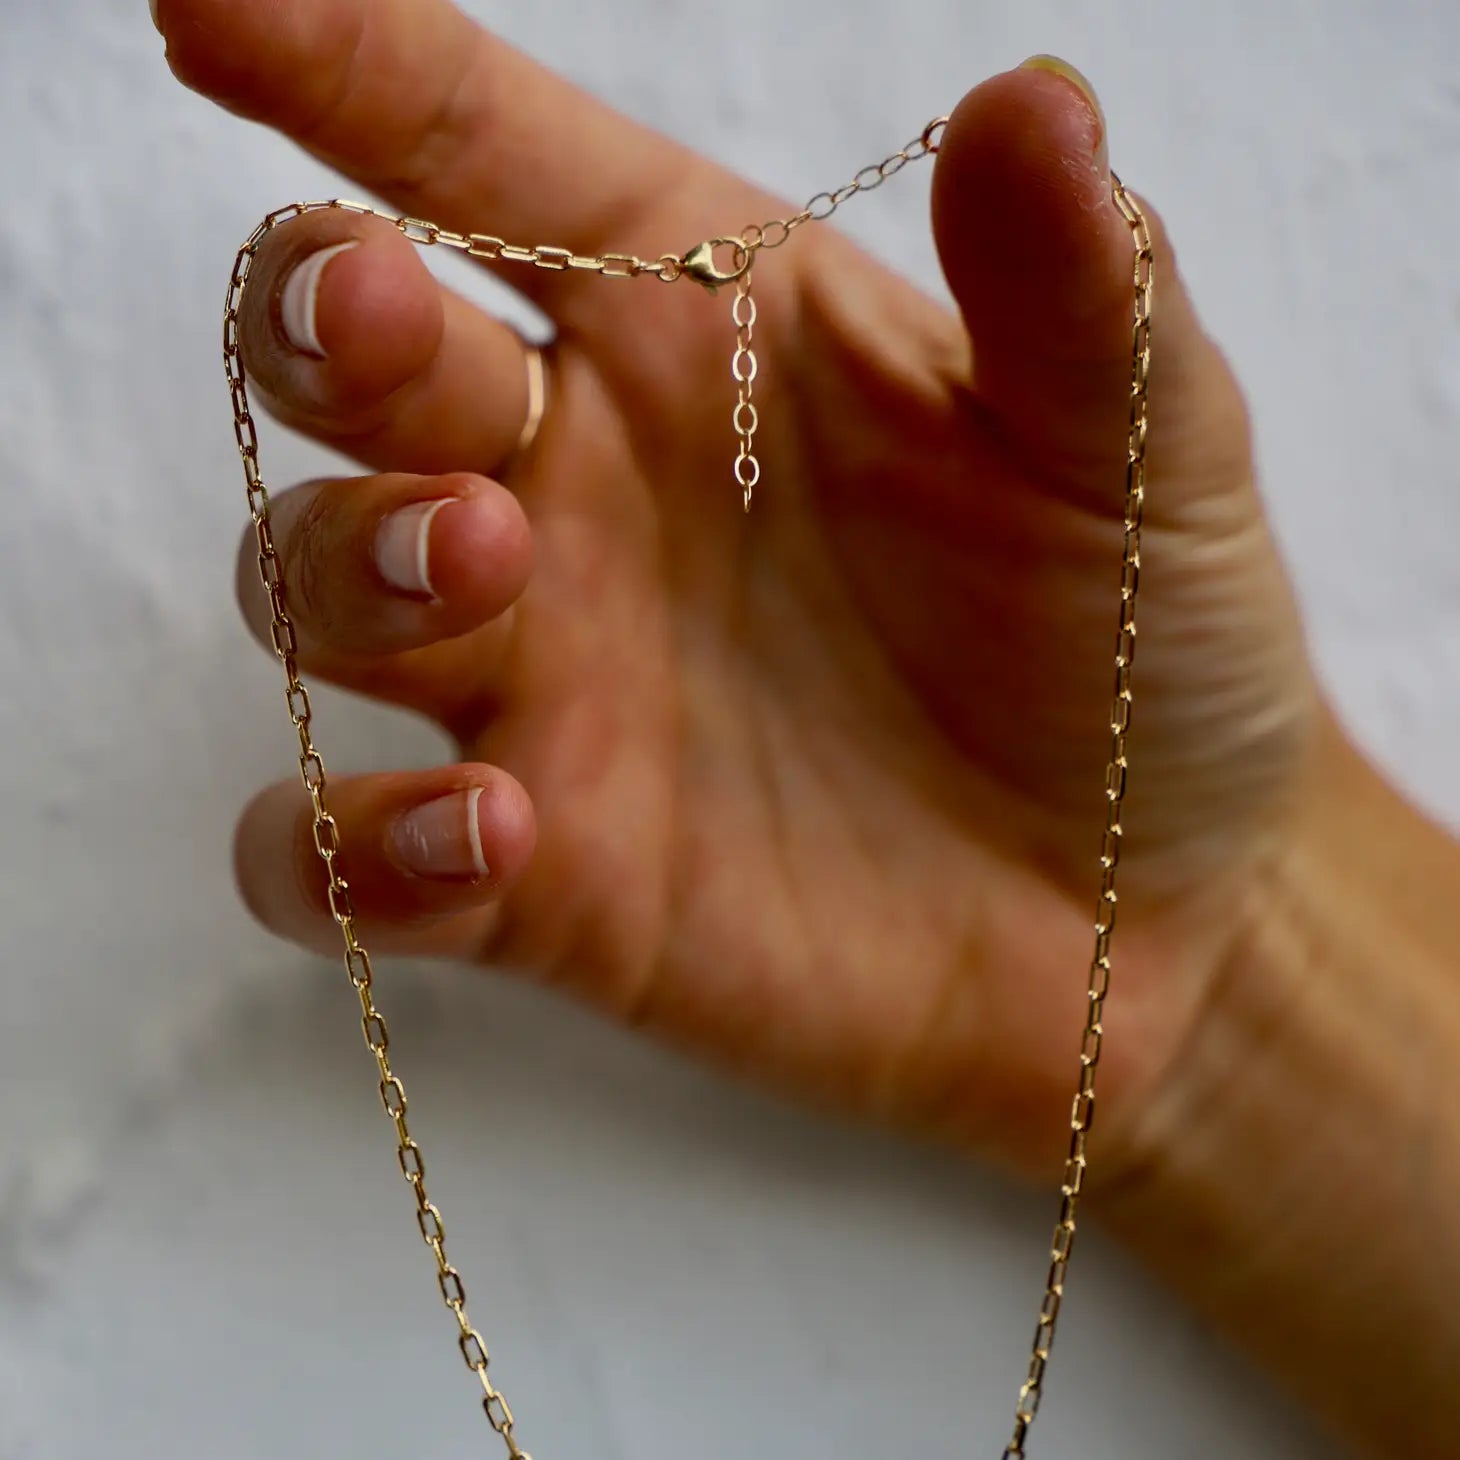 Miniature Paperclip Chain Necklace